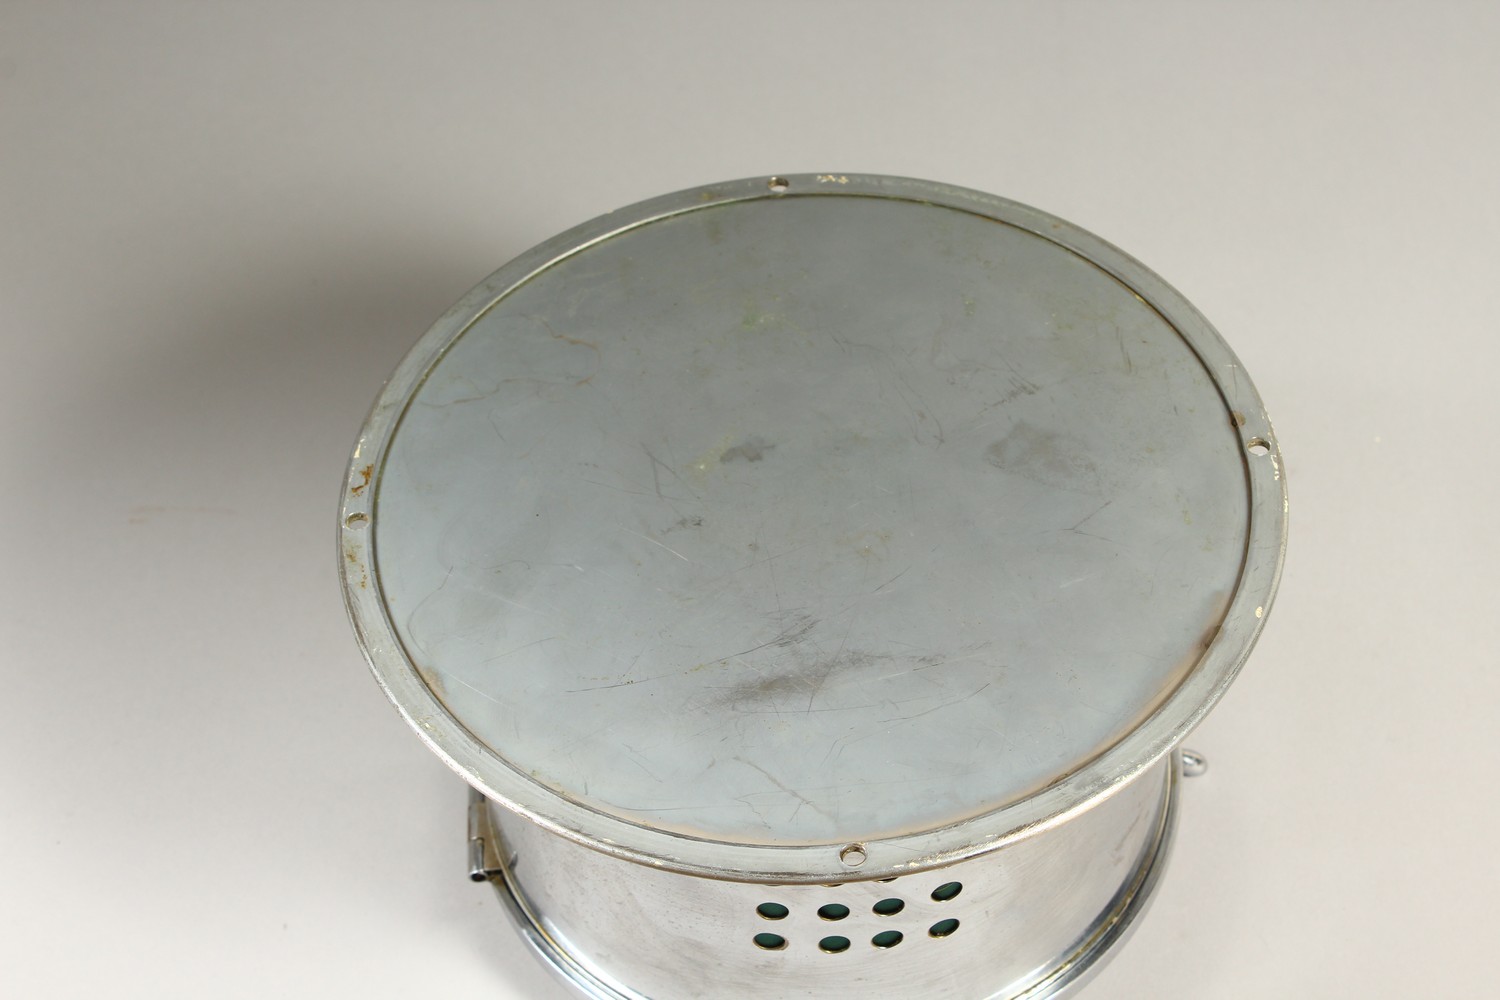 AN EARLY 20TH CENTURY NICKEL PLATED CIRCULAR WALL CLOCK, chiming on the hour, cream enamel dial with - Image 8 of 8